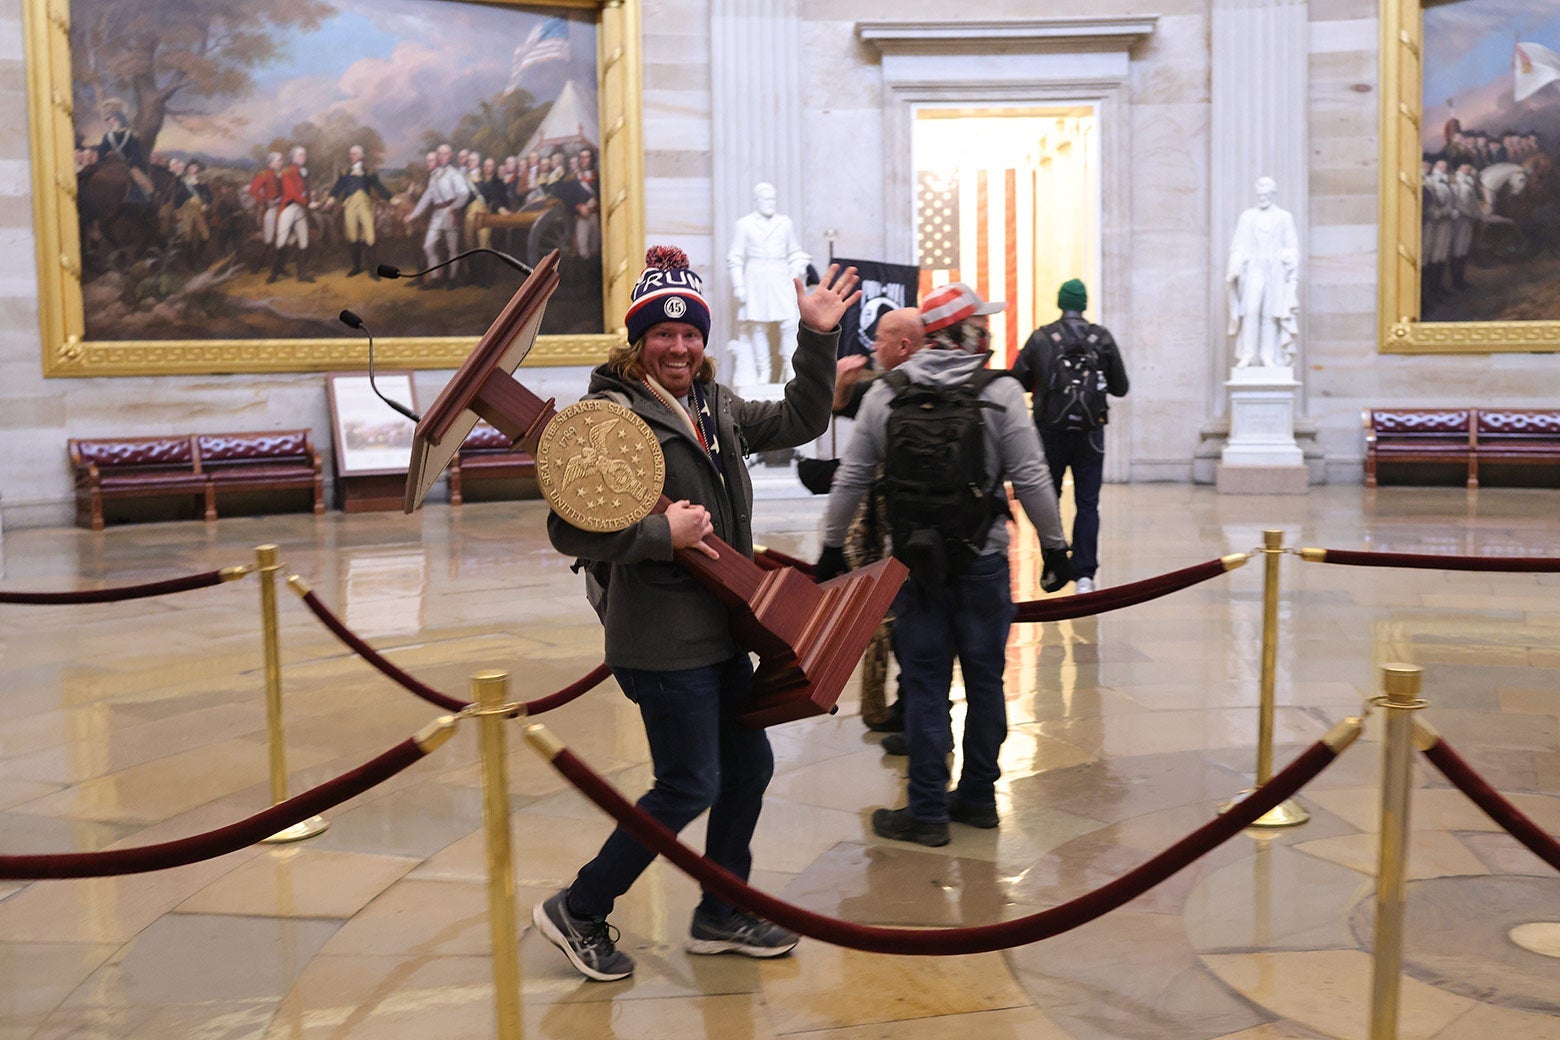 A protester in a Trump beanie smiles and waves at the camera while walking through the Capitol holding a podium for the speaker of the House.